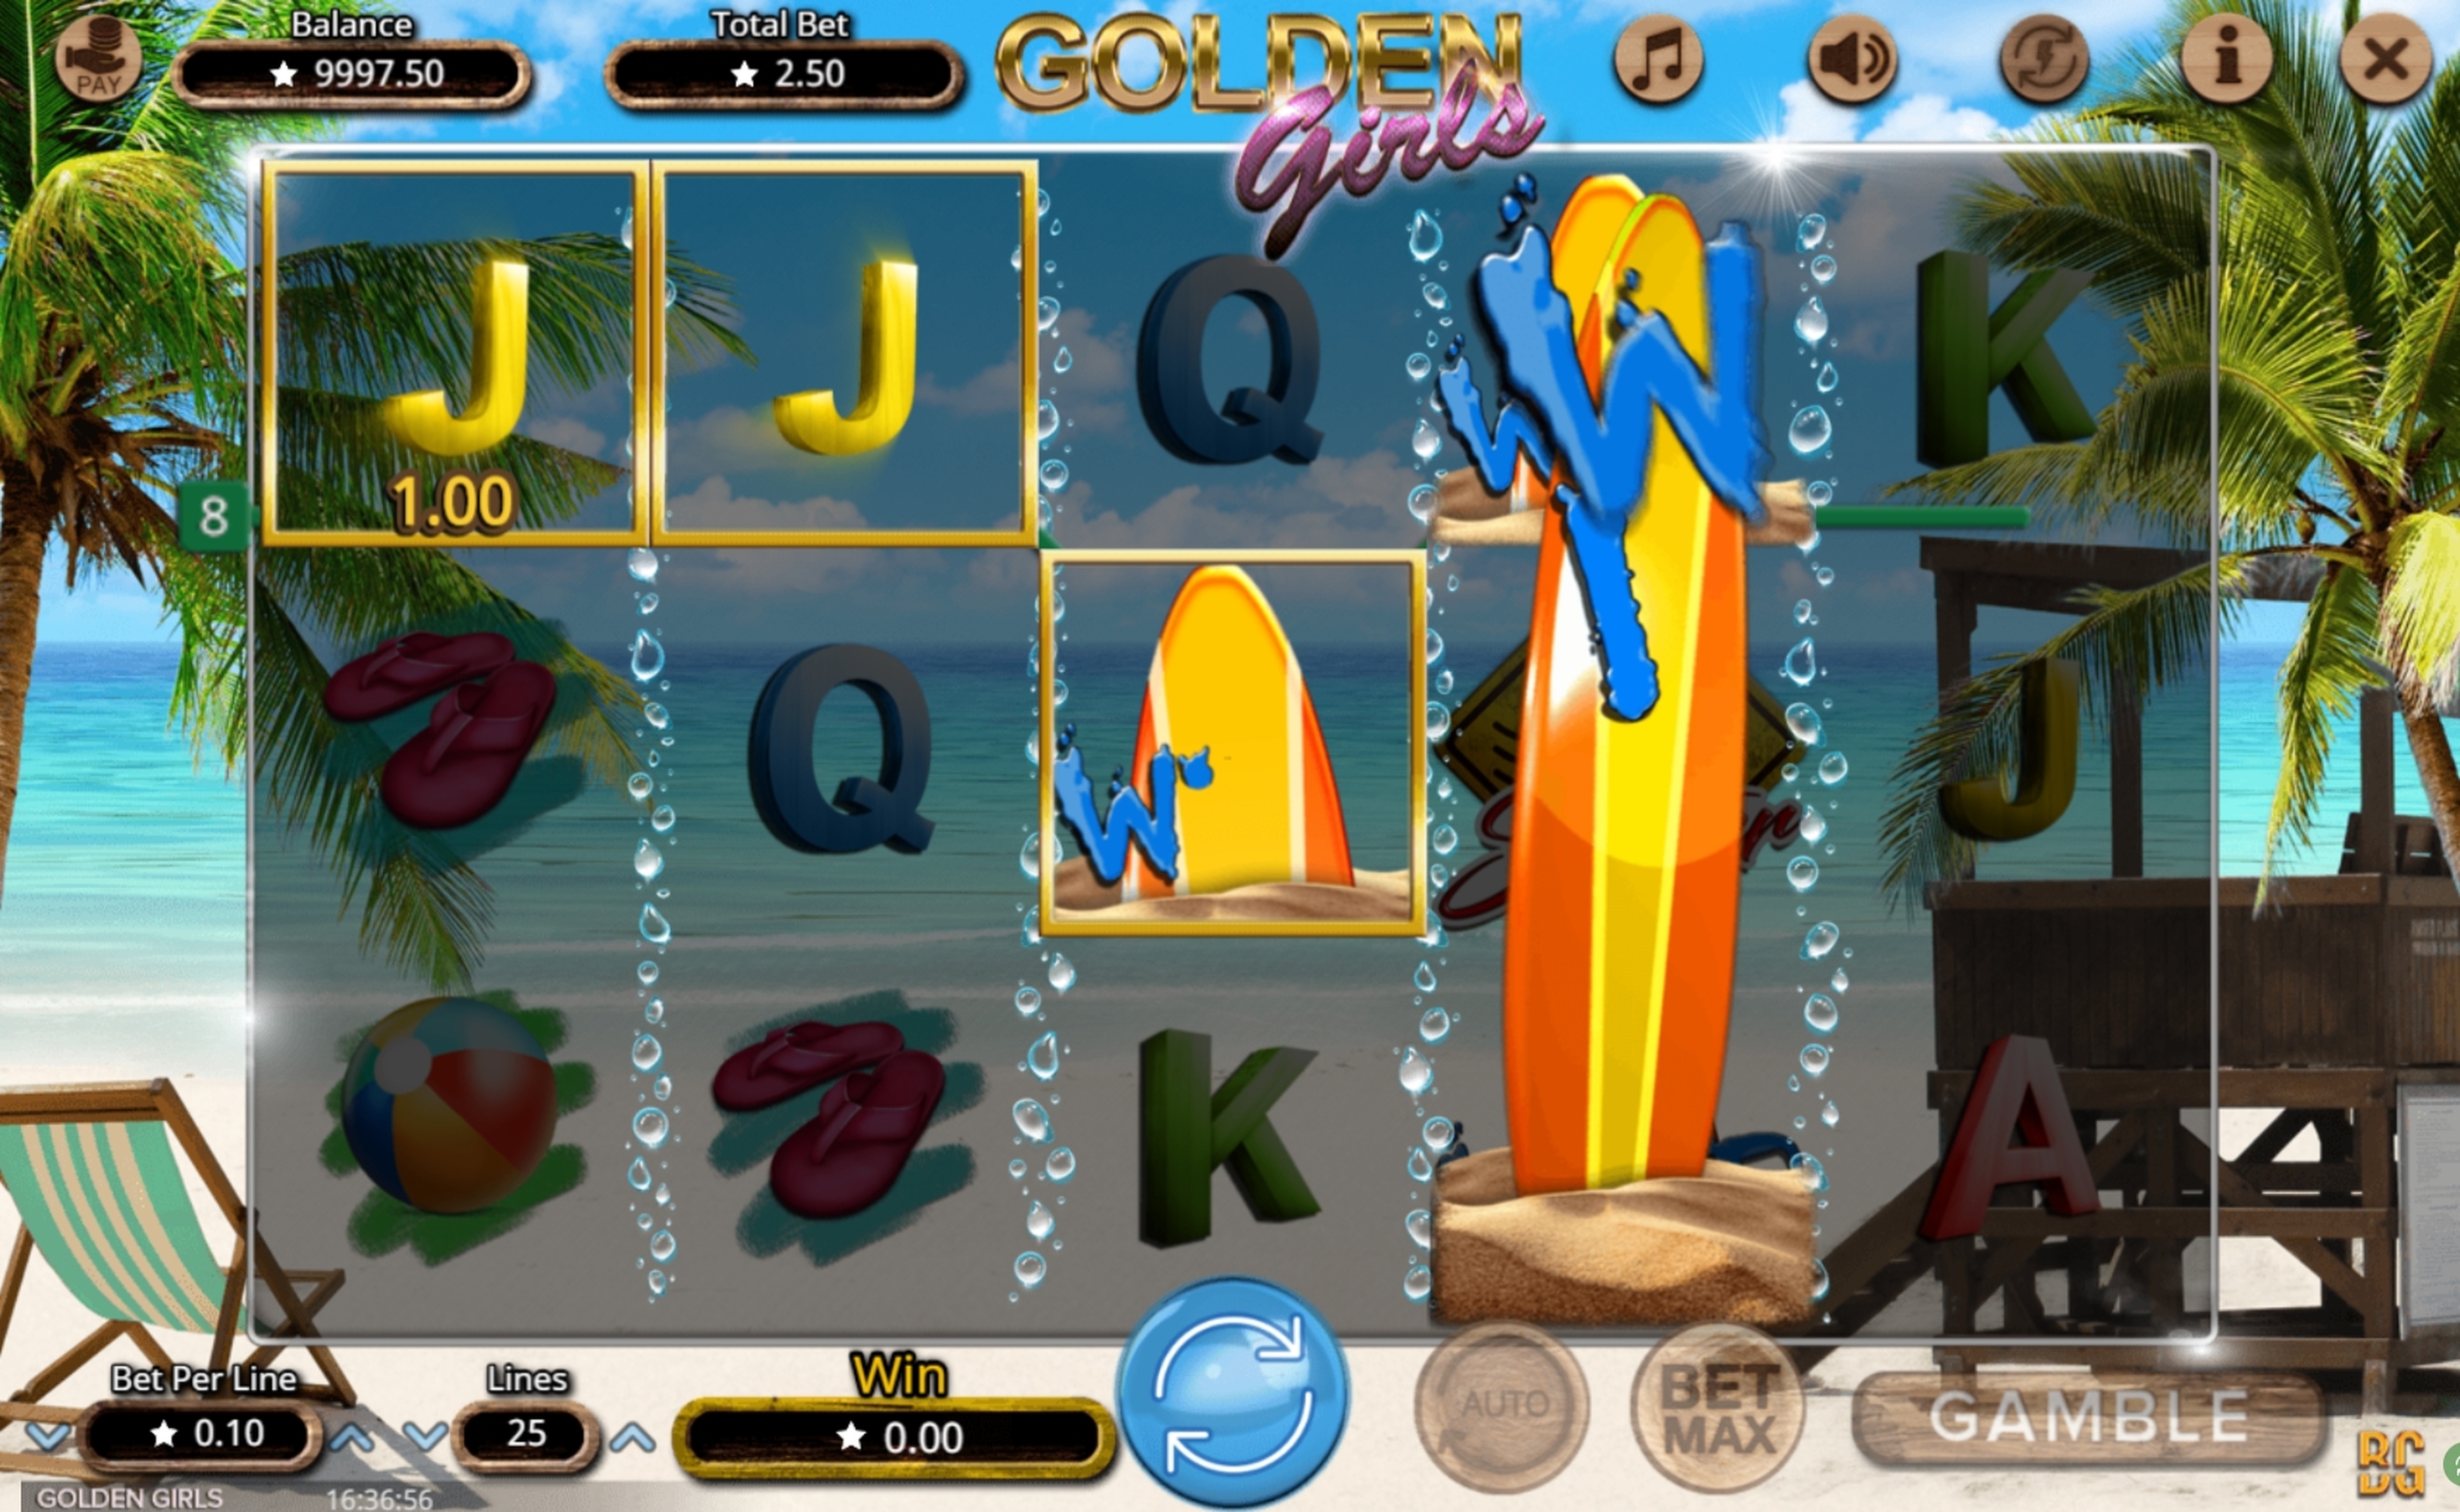 Win Money in Golden Girls Free Slot Game by Booming Games